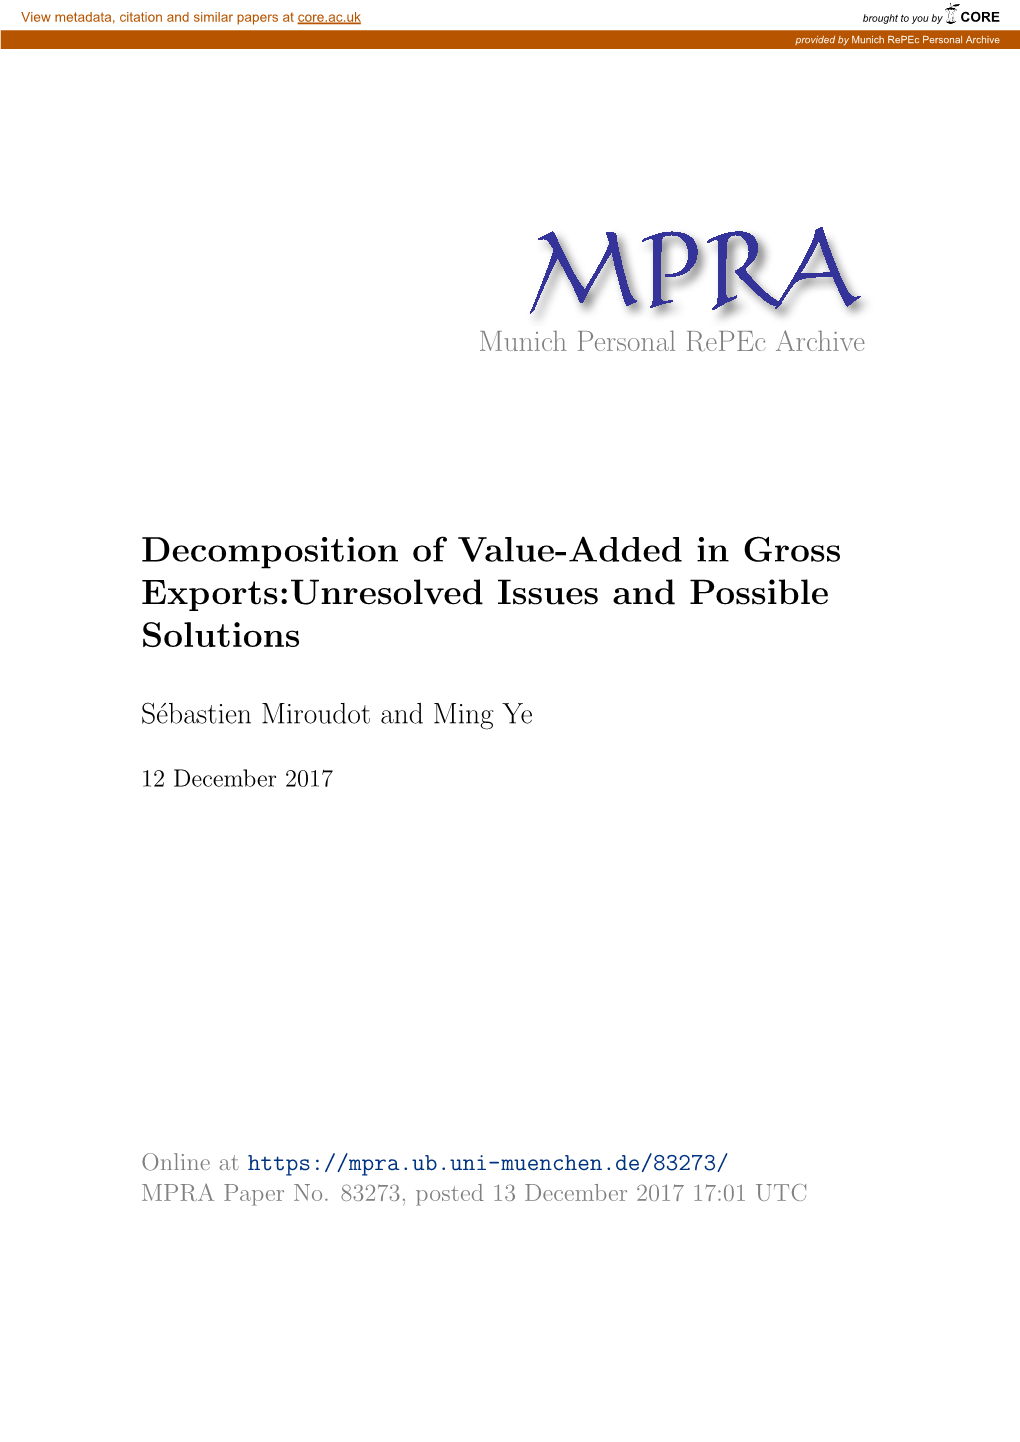 Decomposition of Value-Added in Gross Exports:Unresolved Issues and Possible Solutions